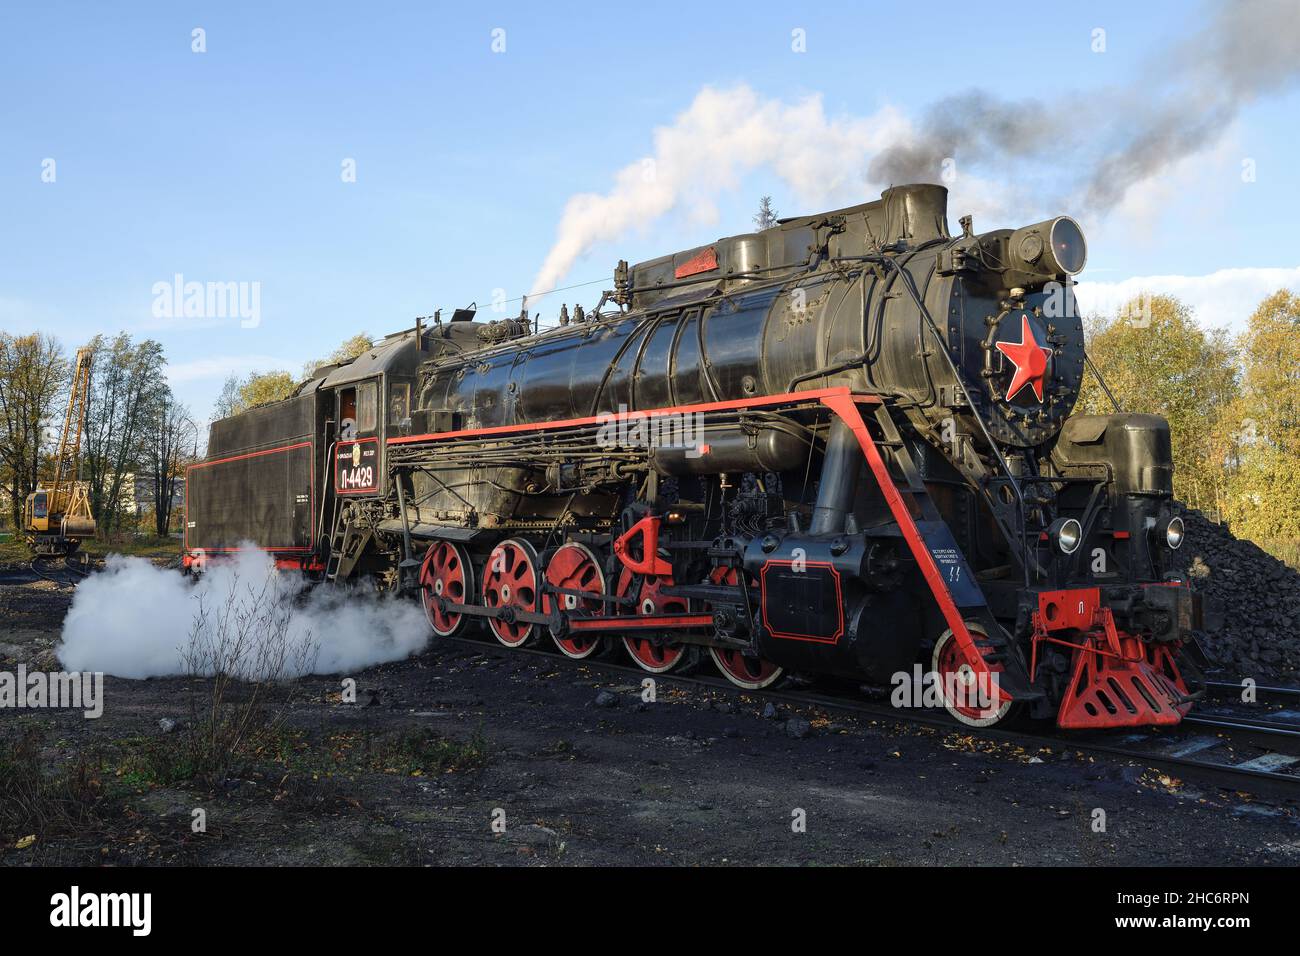 SORTAVALA, RUSSIA - OCTOBER 07, 2021: Old Soviet steam locomotive of the 'L' series (L-4429, Lebedyanka) on the access roads of Sortavala station on a Stock Photo